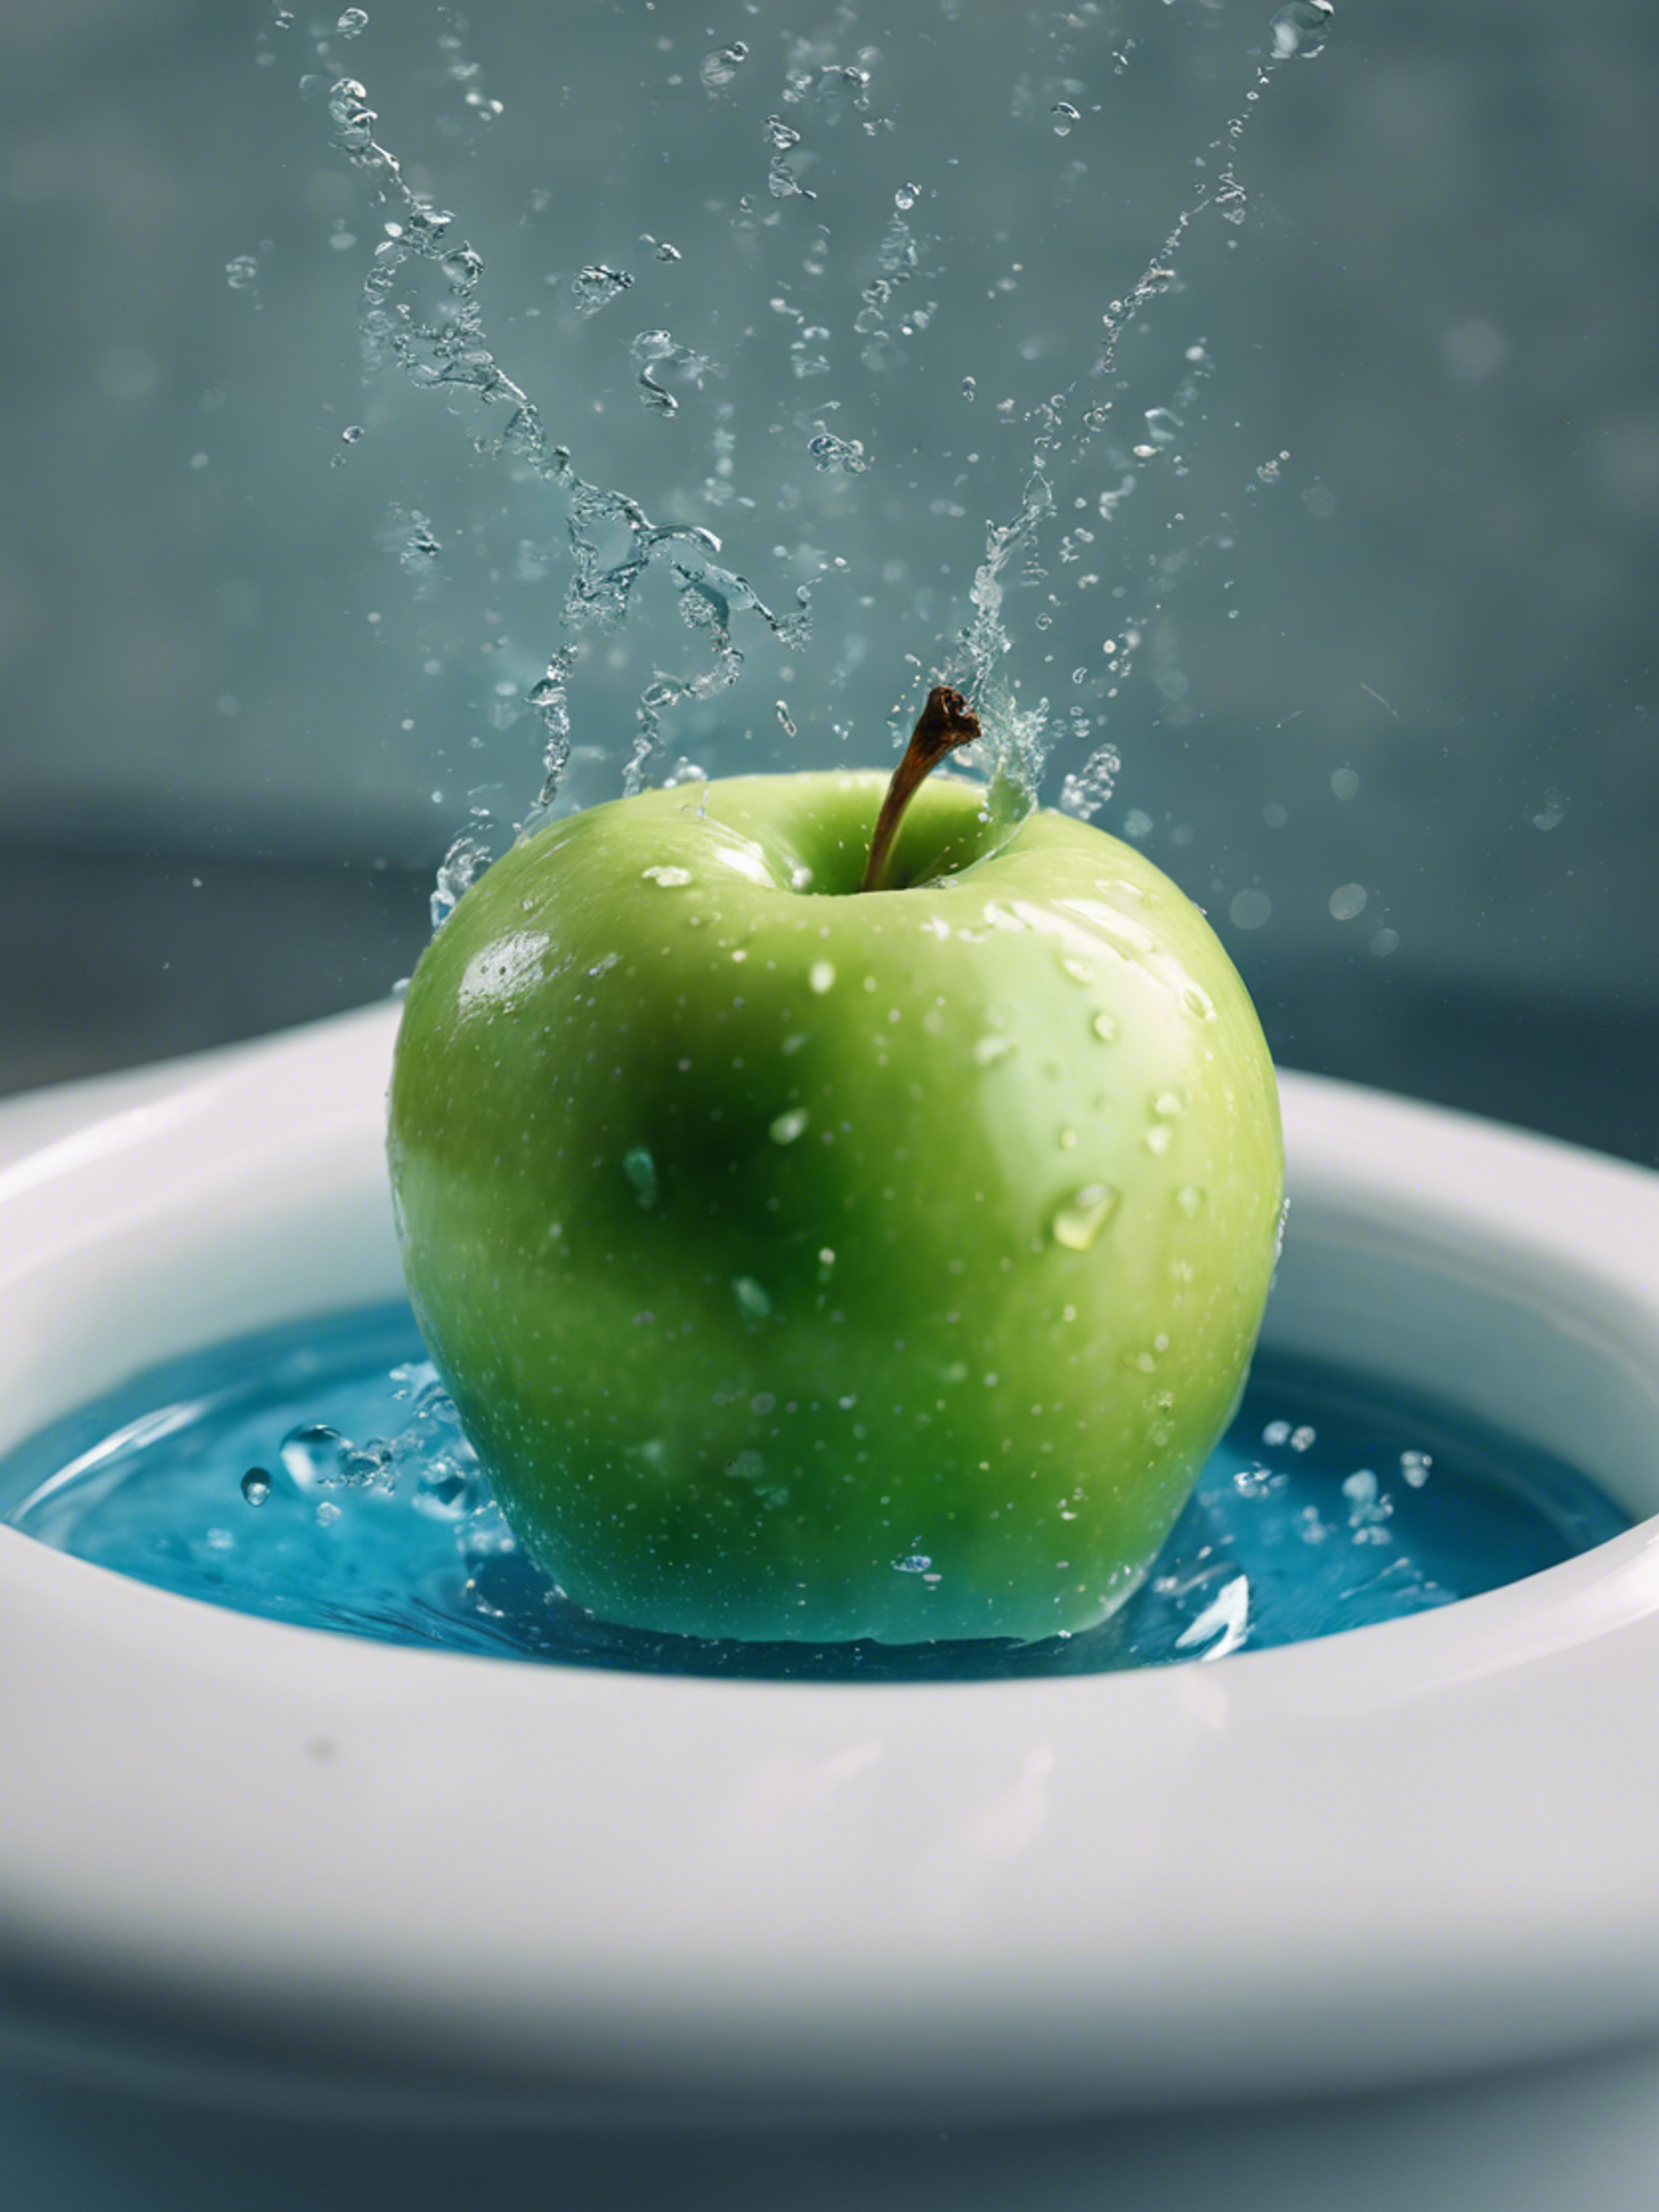 A green apple falling into a basin filled with azure blue water. Tapeta[a9bb5407cd4a4f929343]